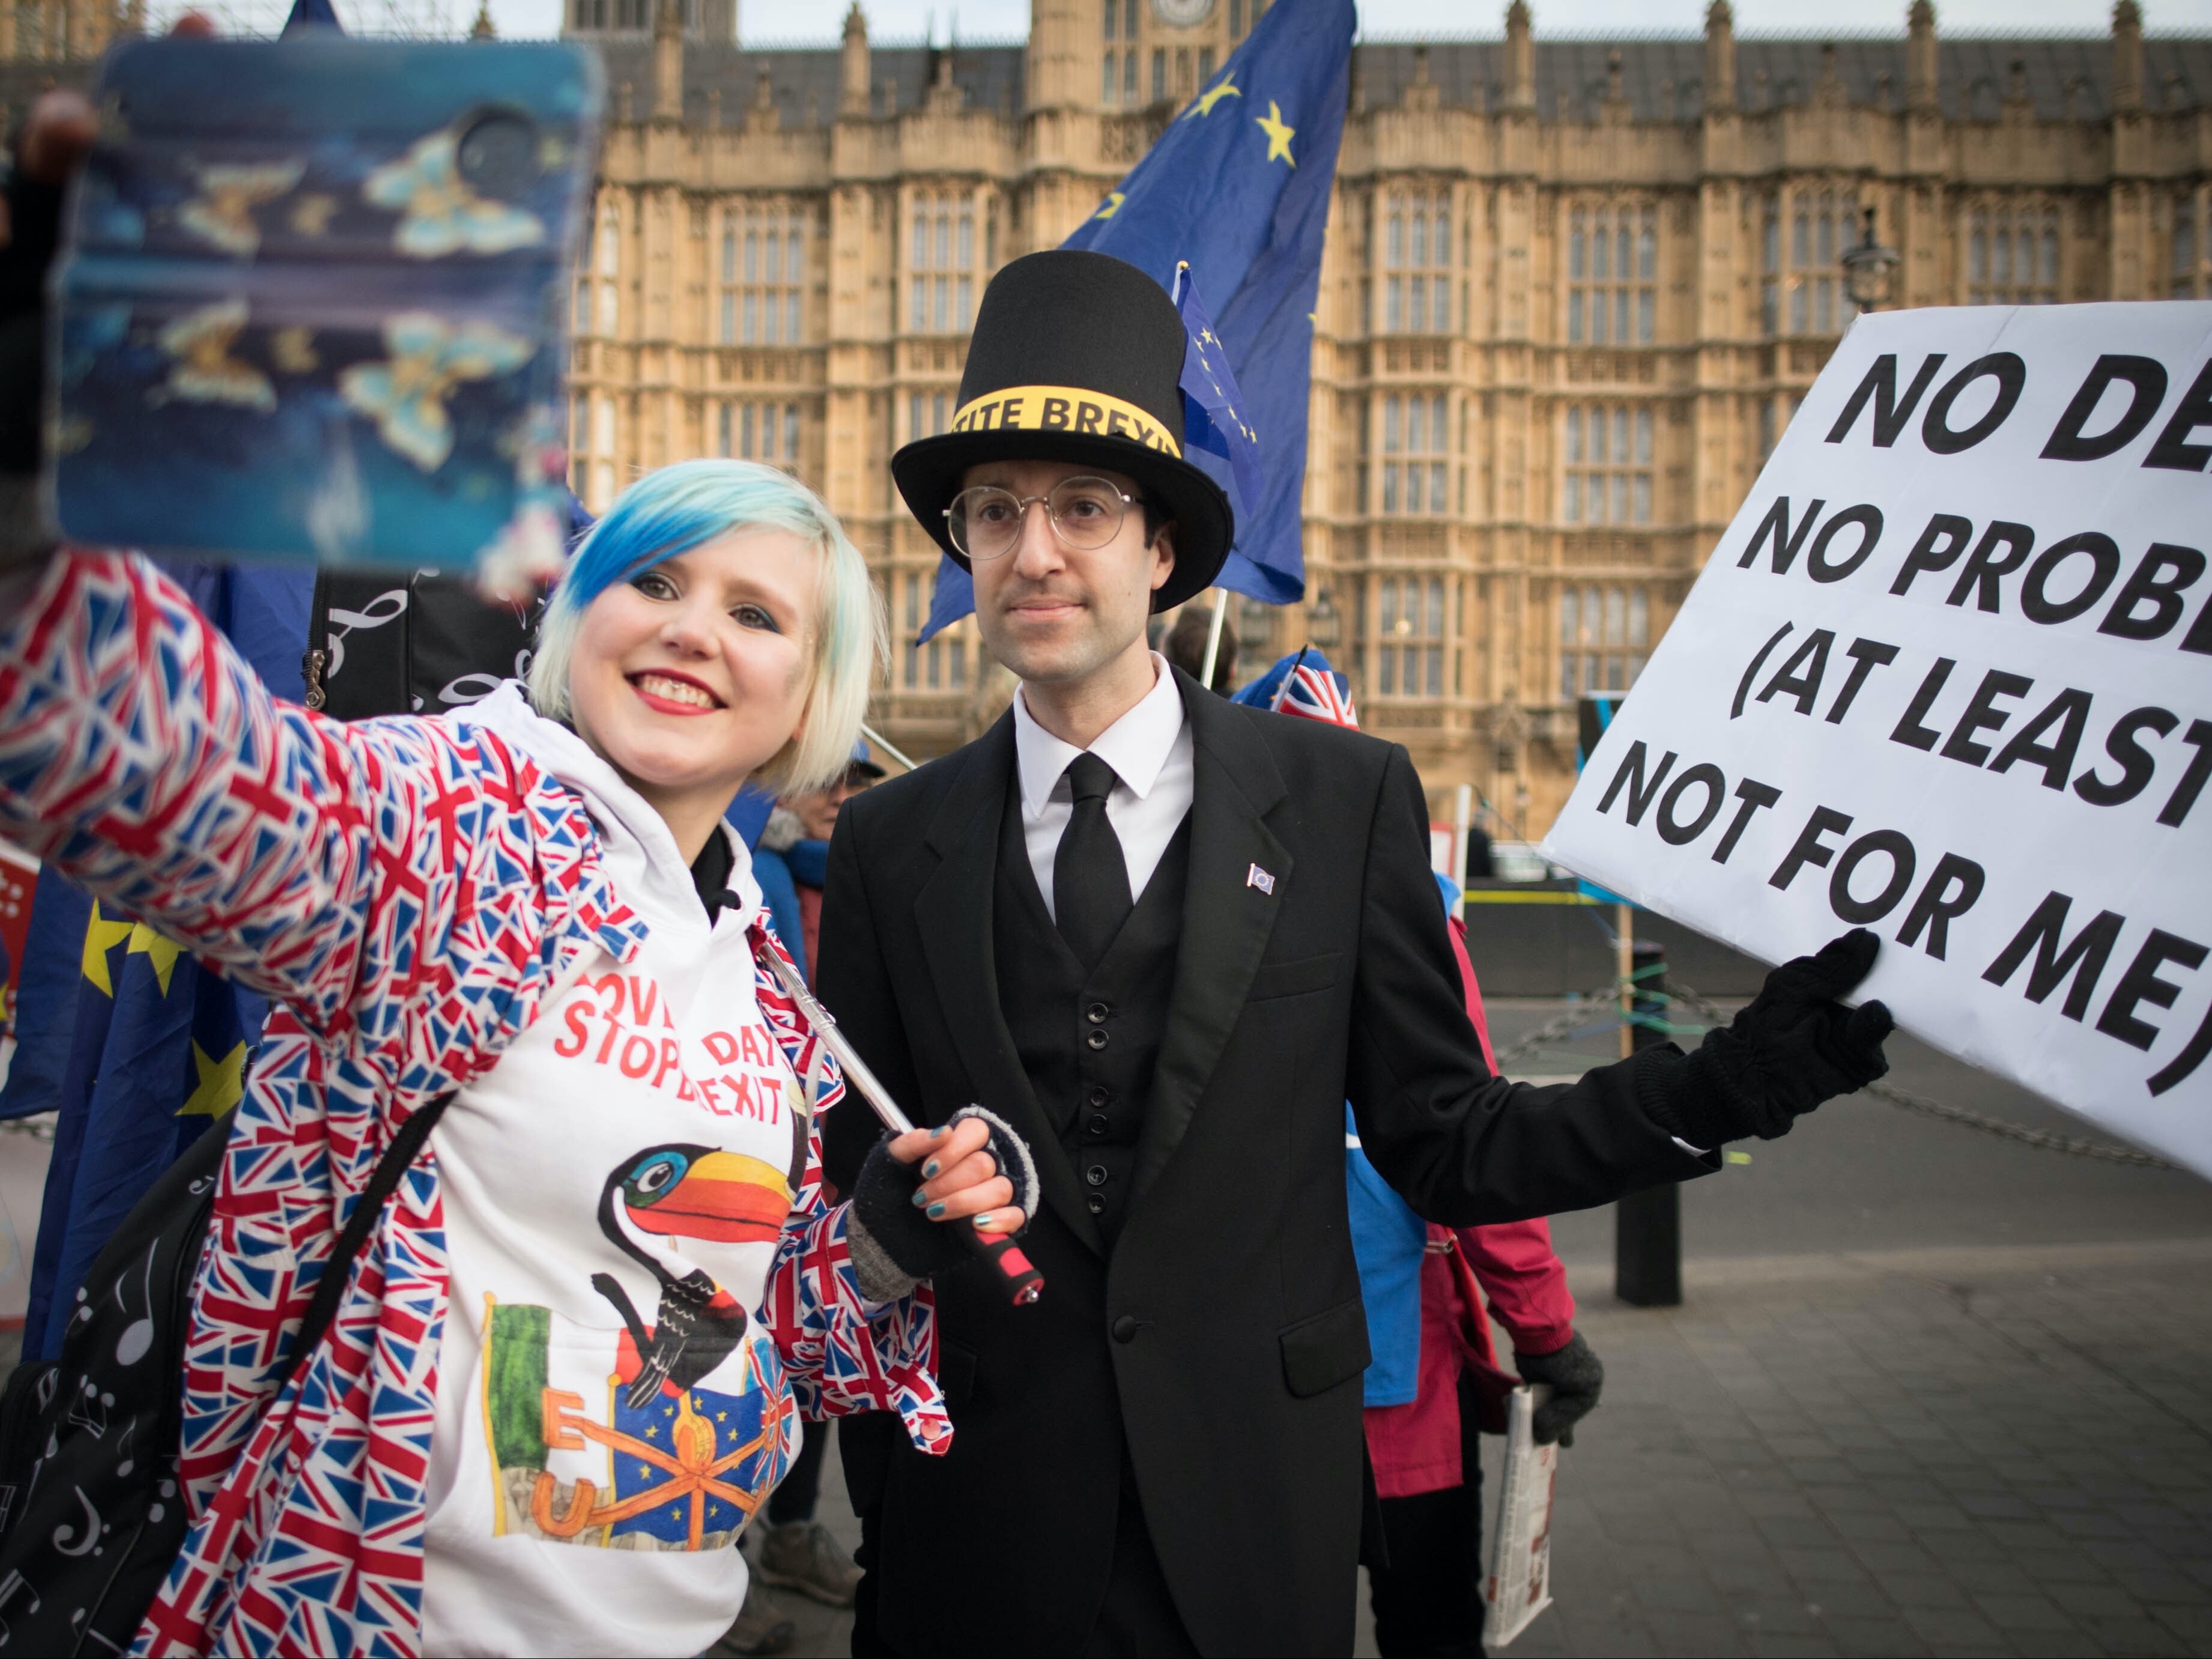 2019 saw several Brexit-related protests outside parliament